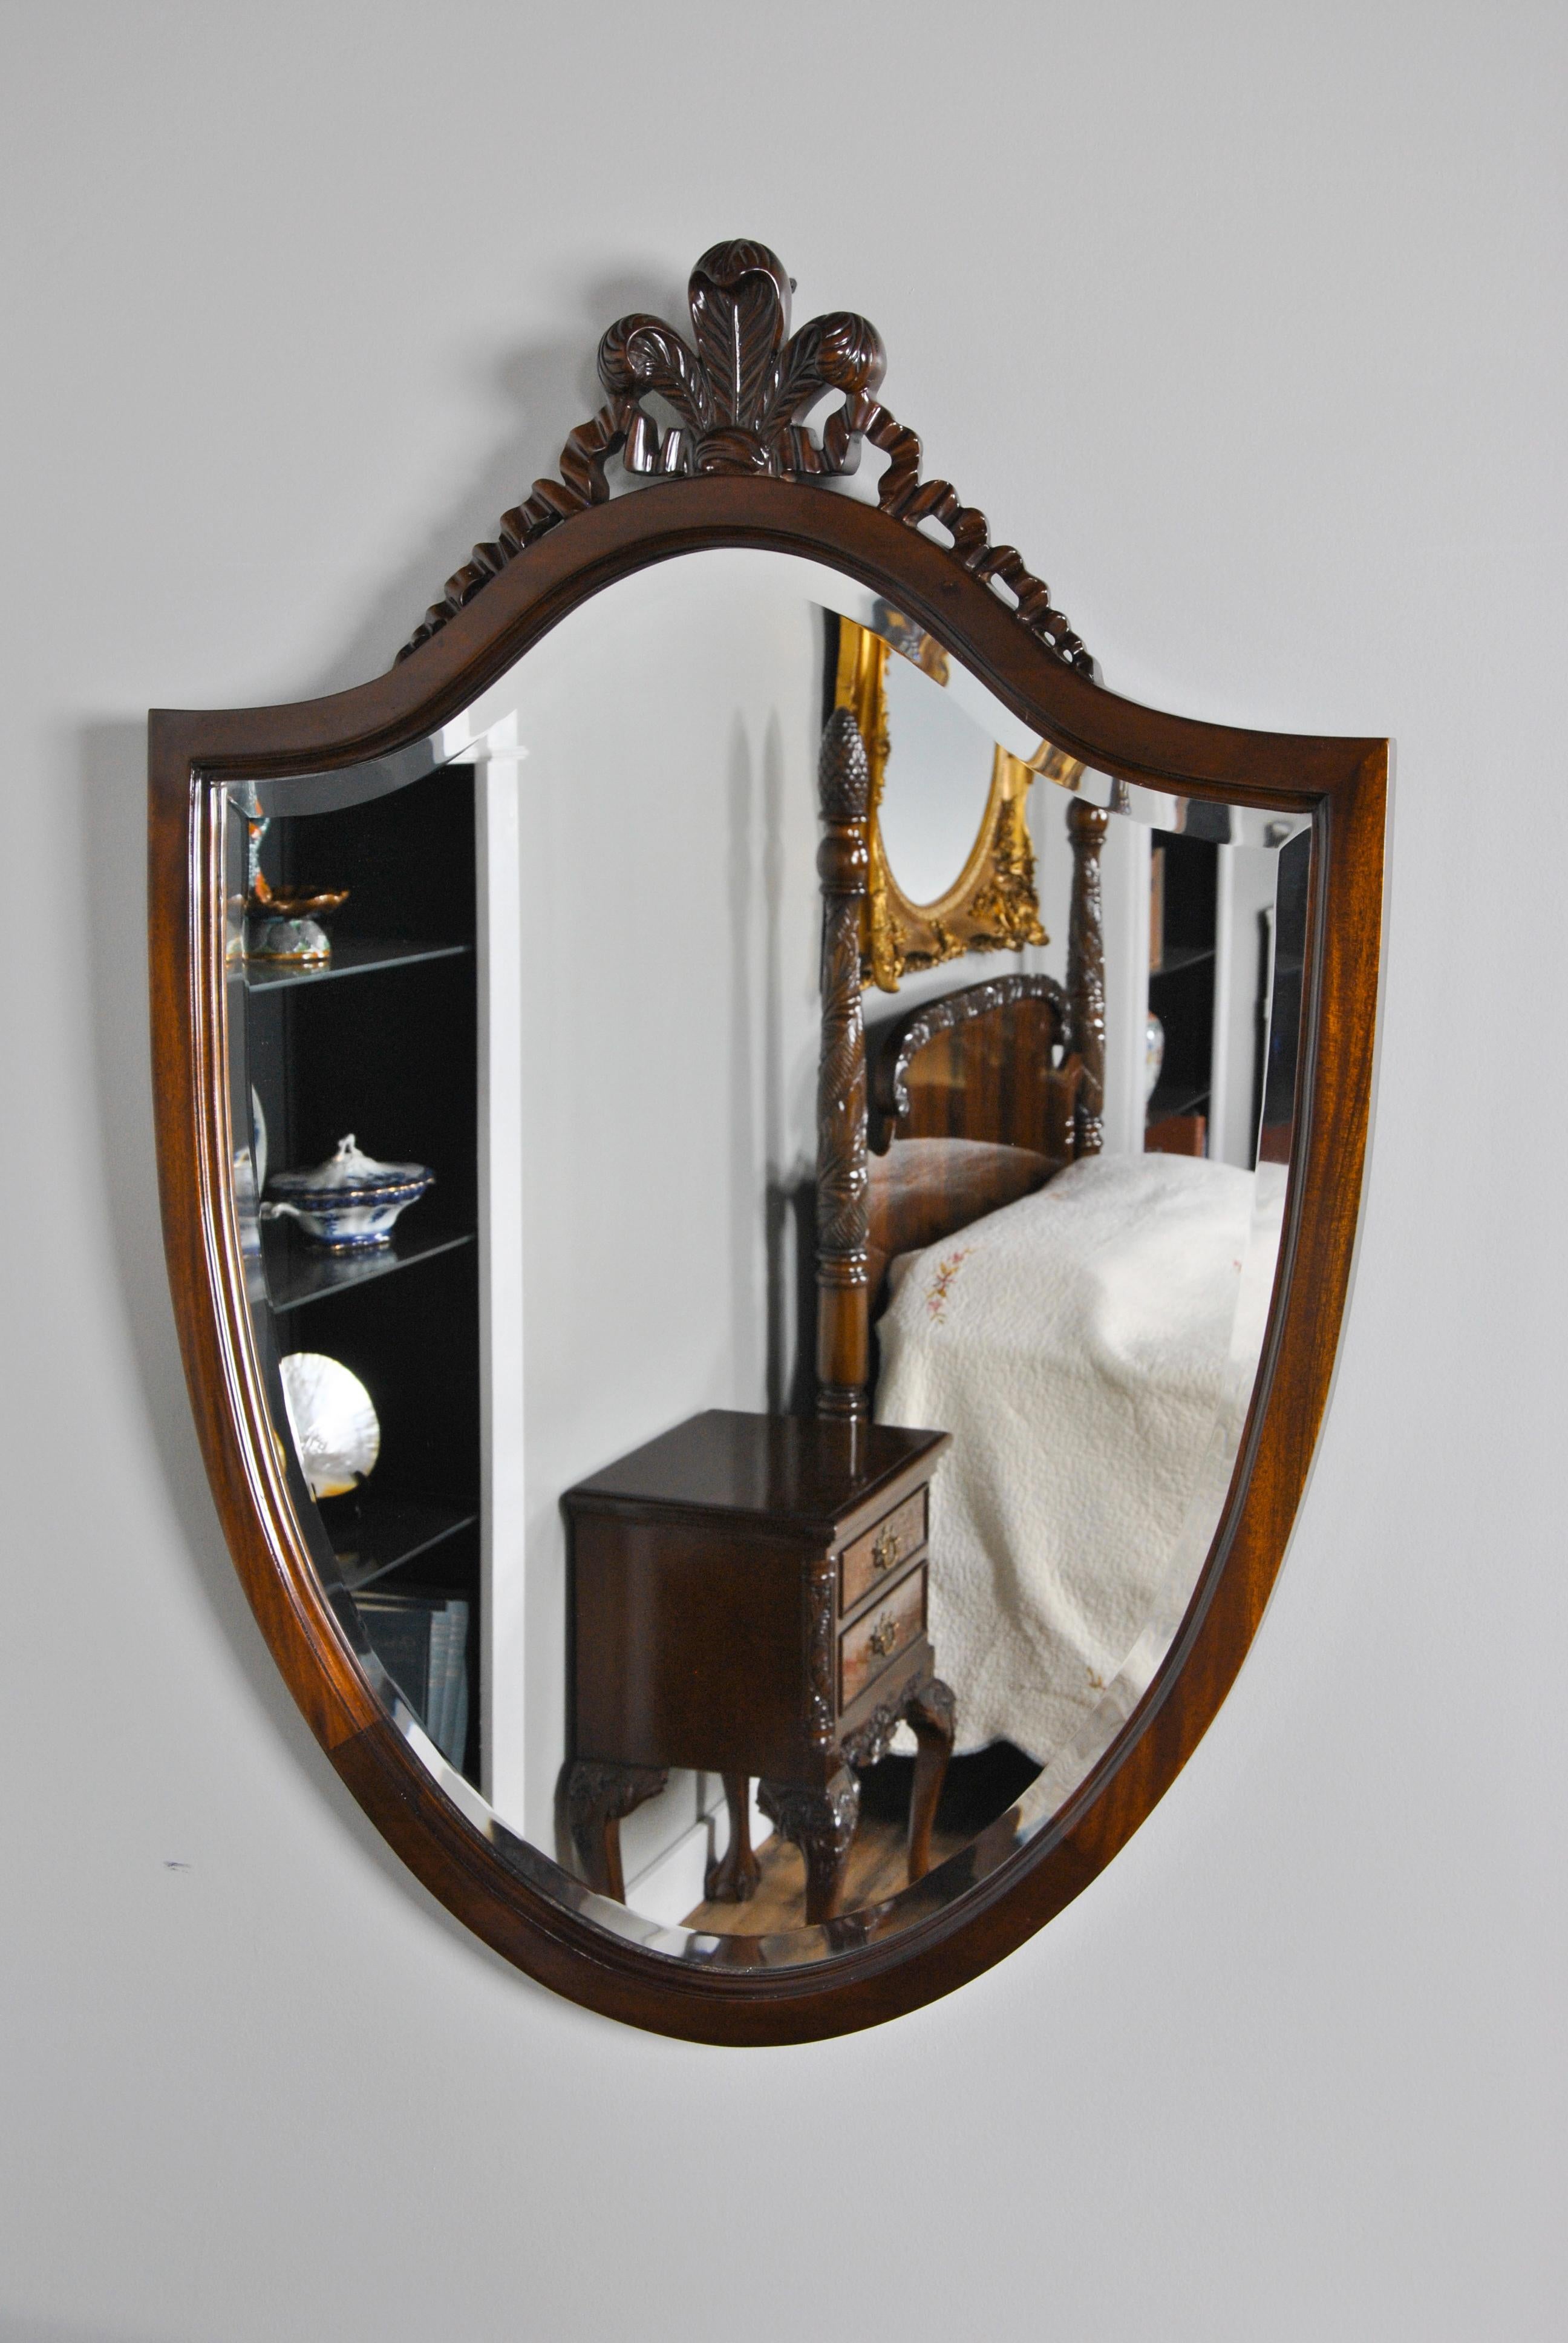 A solid Mahogany Carved Mirror with hand carving helps discern this piece from its' mass produced counter parts found in many other stores. Beautifully carved Fleur de Lis design is created by hand in solid mahogany, the mahogany coming from